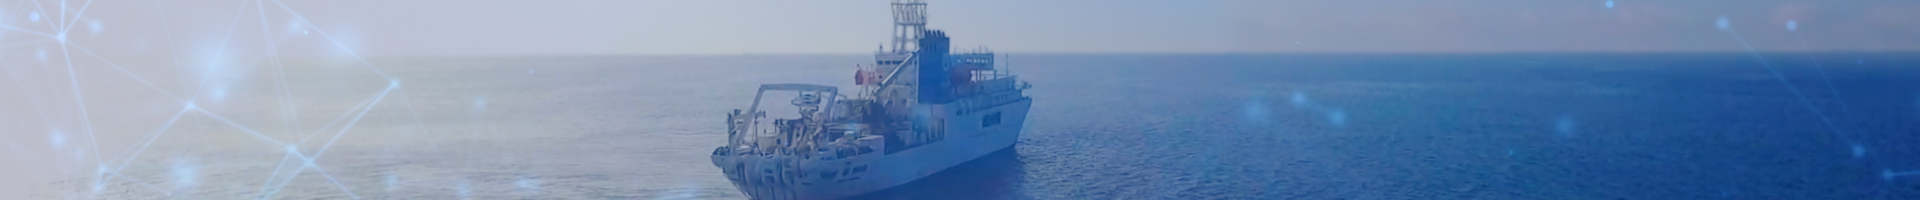 Cable-Laying Vessel